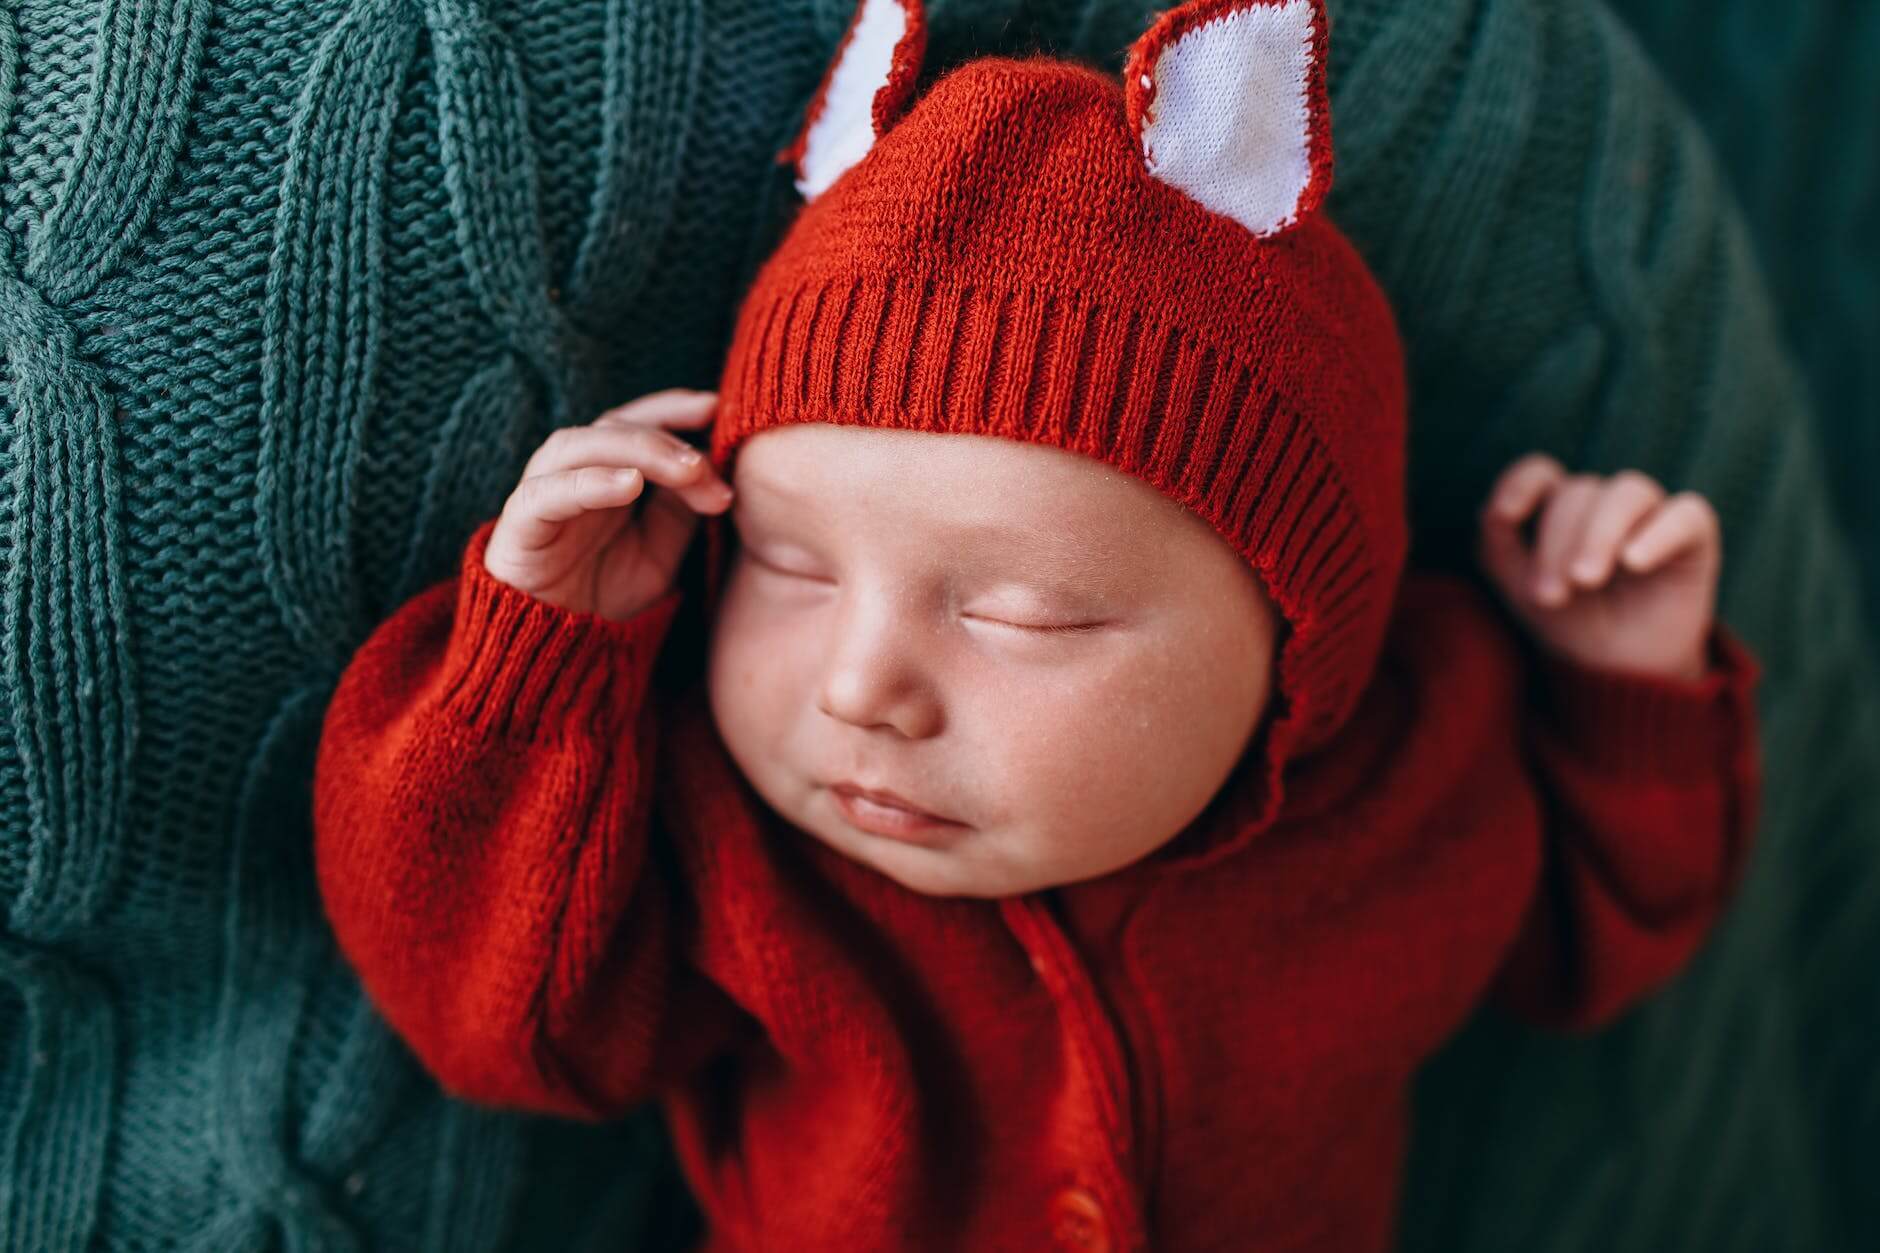 little tranquil baby in red woolen costume sleeping